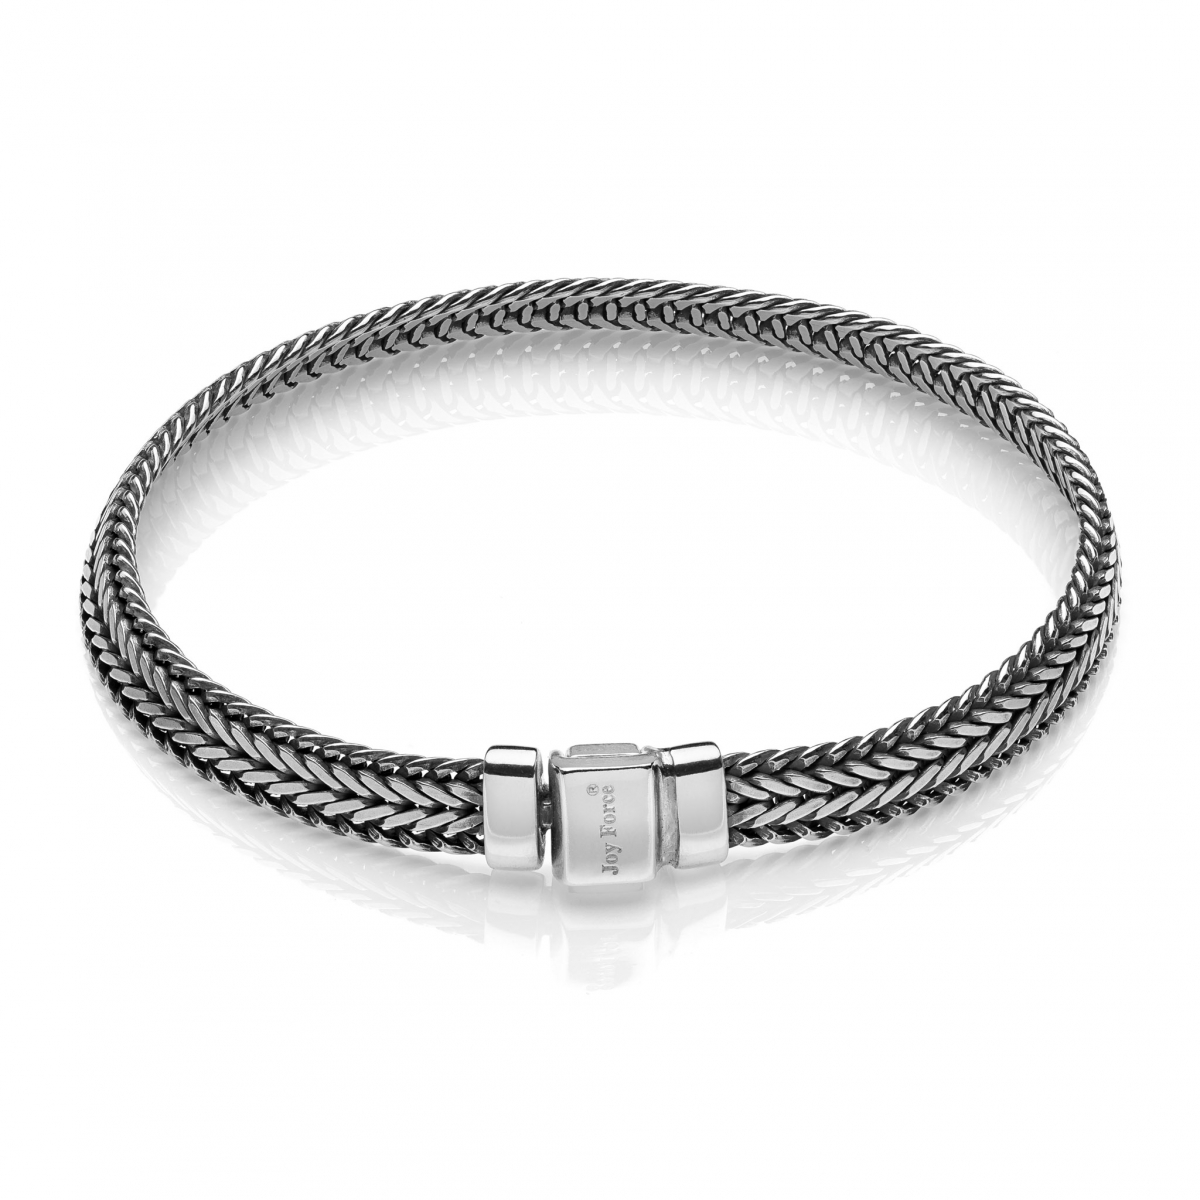 Men's Engraved Woven Bracelet with Clasp | Lisa Angel